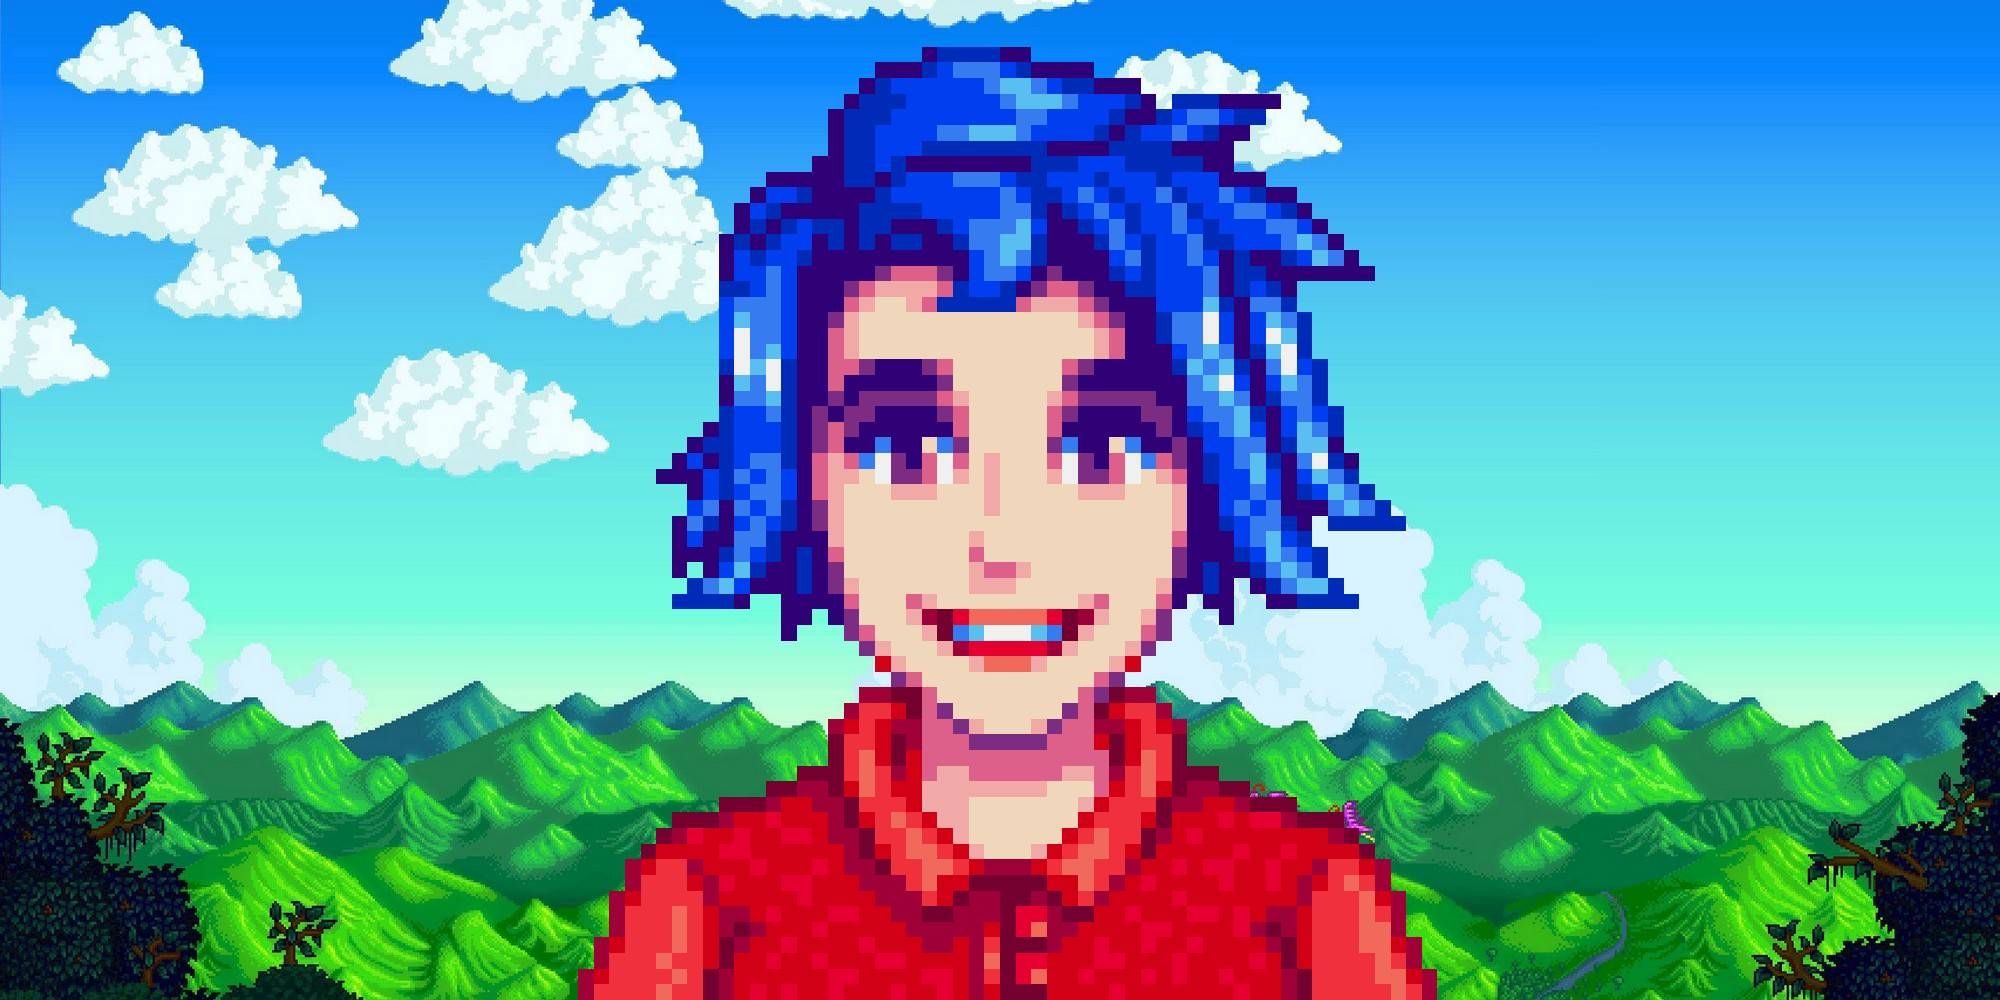 emily on the stardew valley title background marriage